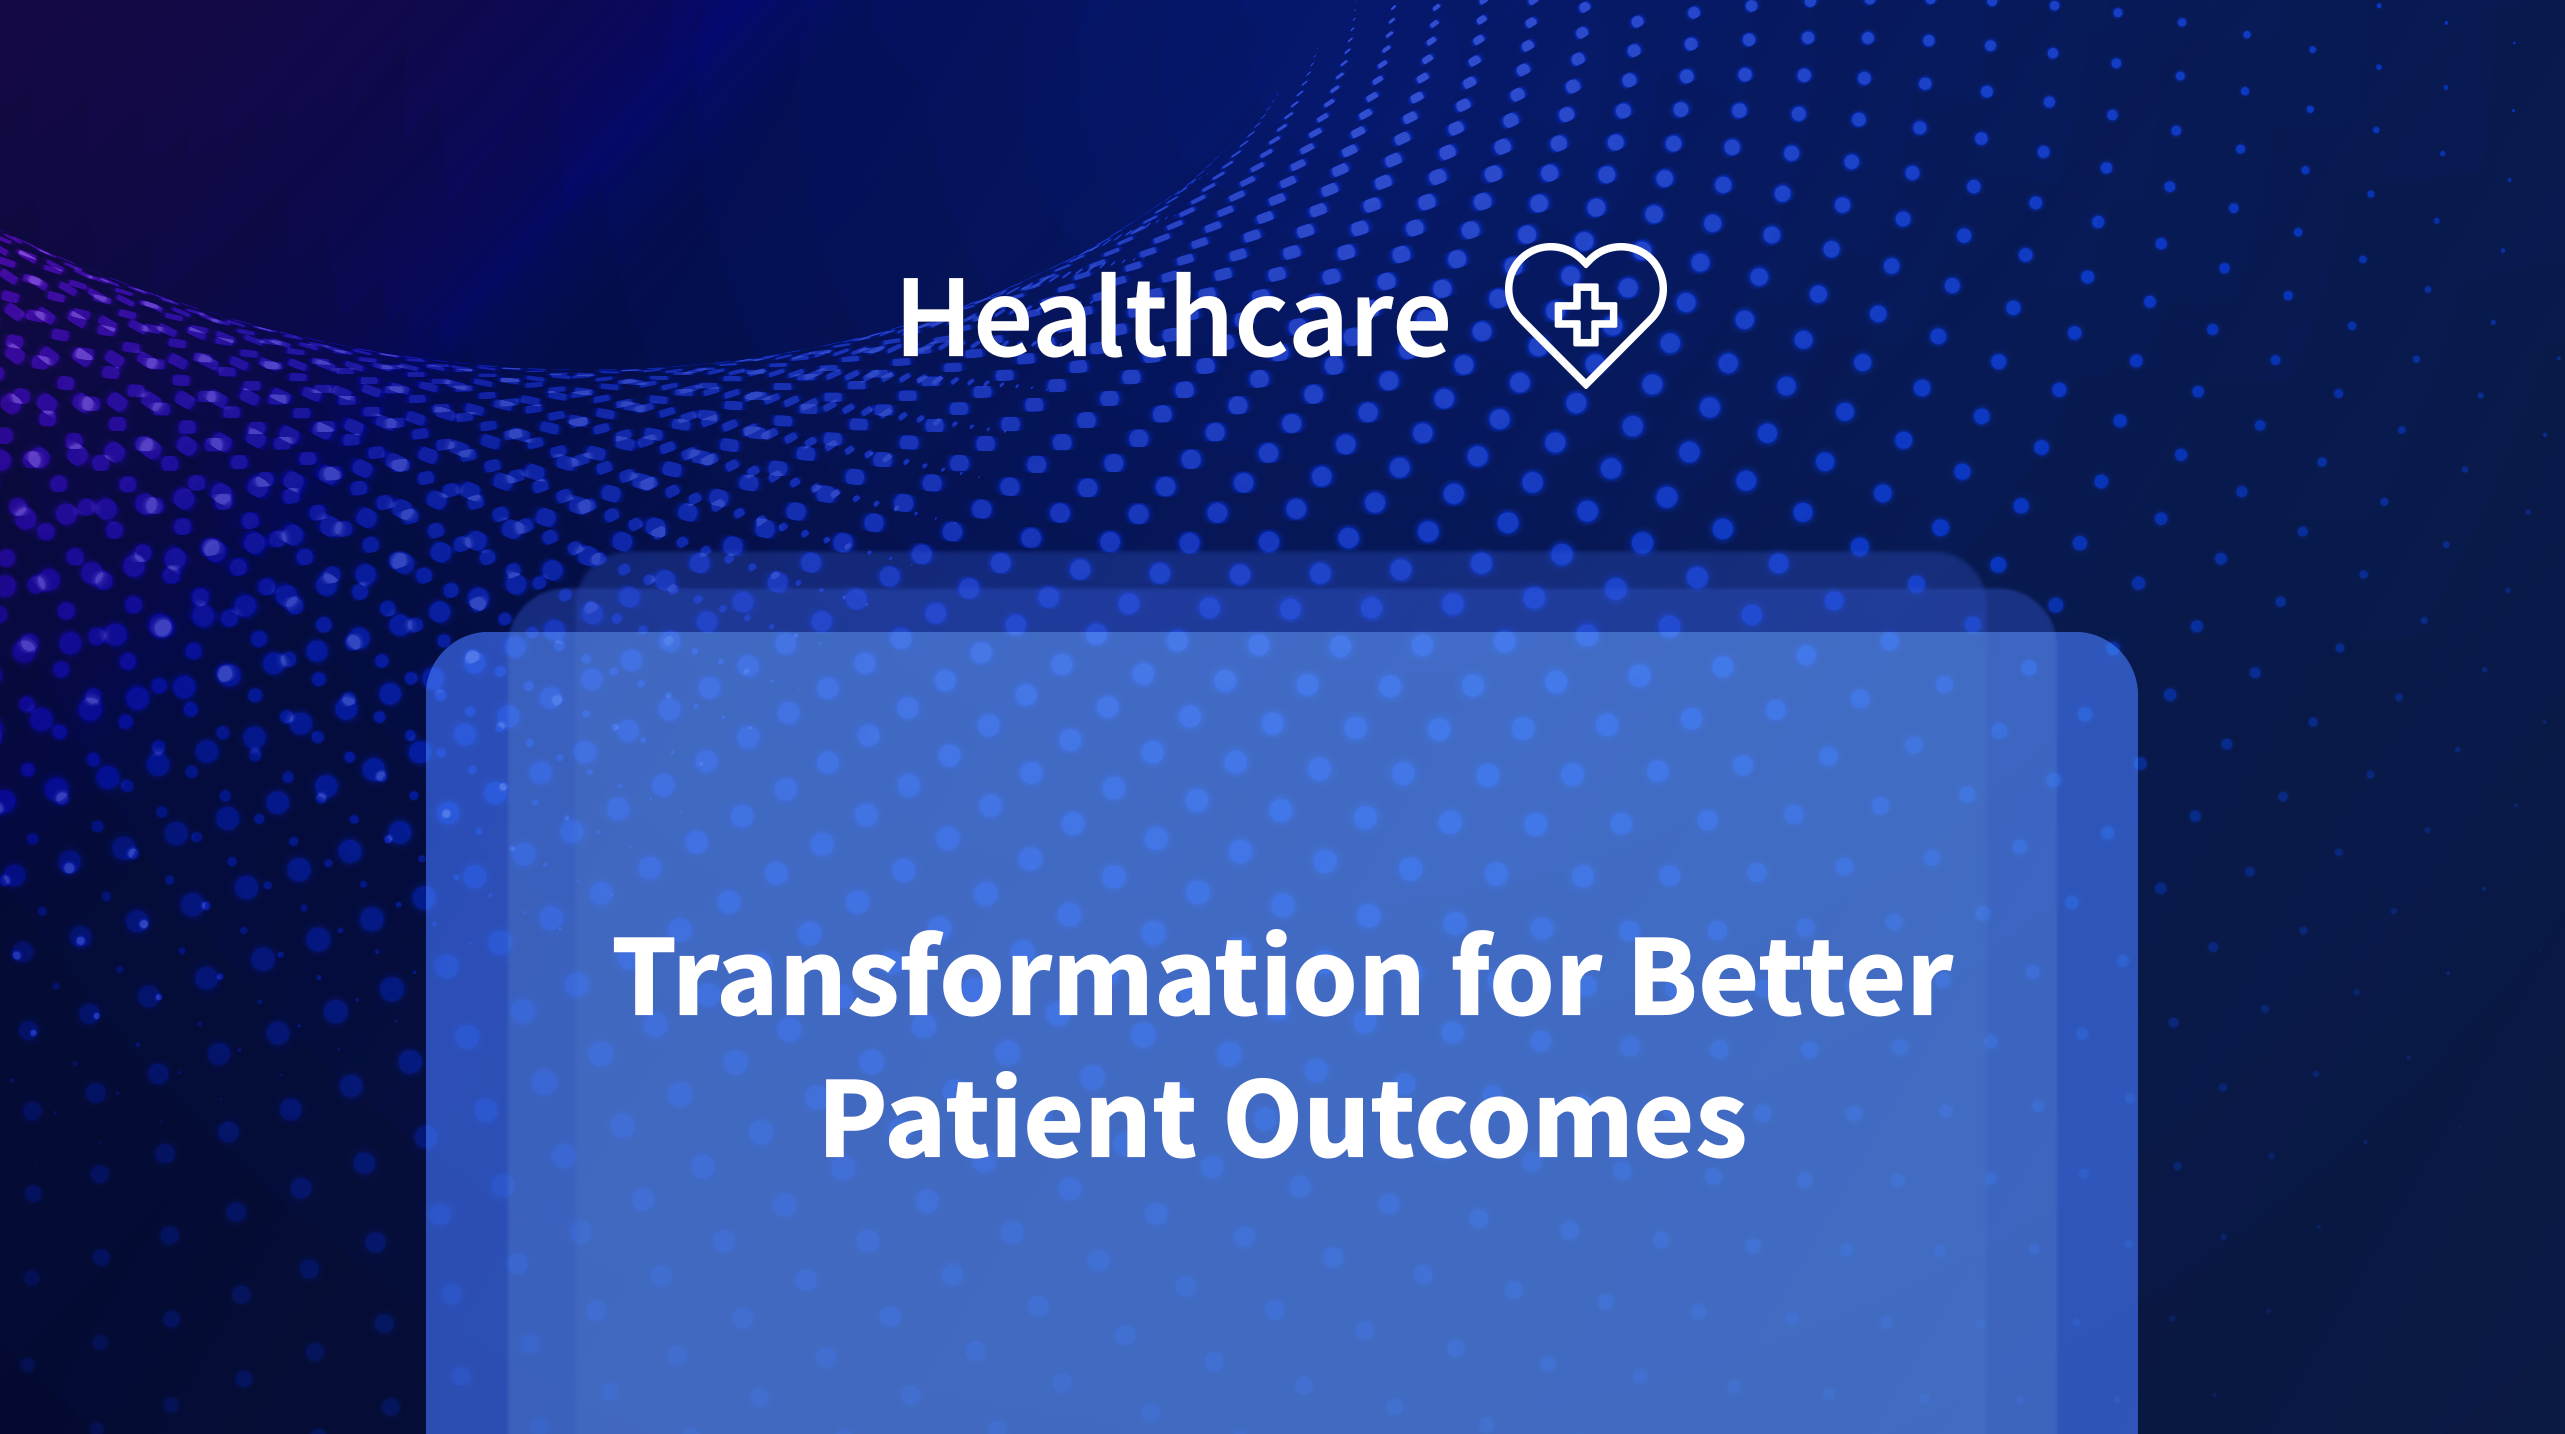 Health care - Transformation for better patient outcomes